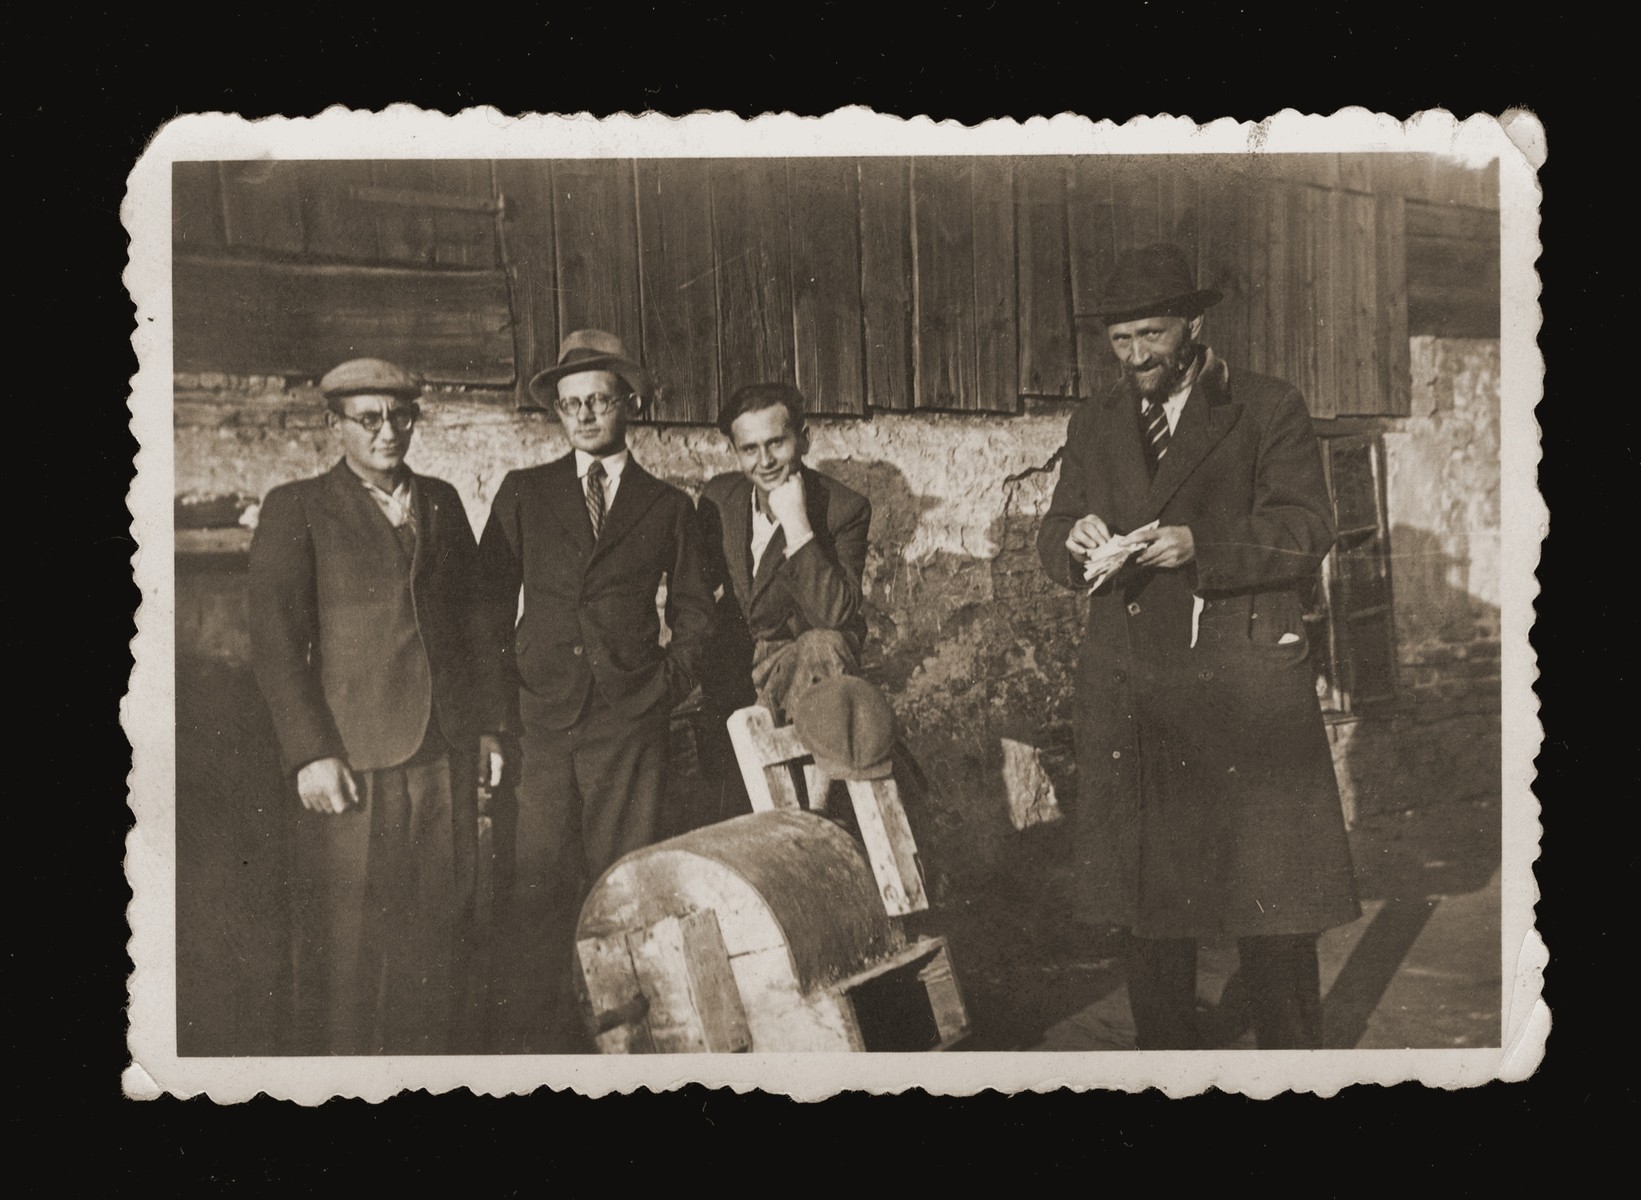 Members of the Feder family pose outside in Dabrowa Gornicza.

Pictured from left to right are Szrage, Mosze, Yehiel and their father, Abraham Yitzhak Feder.